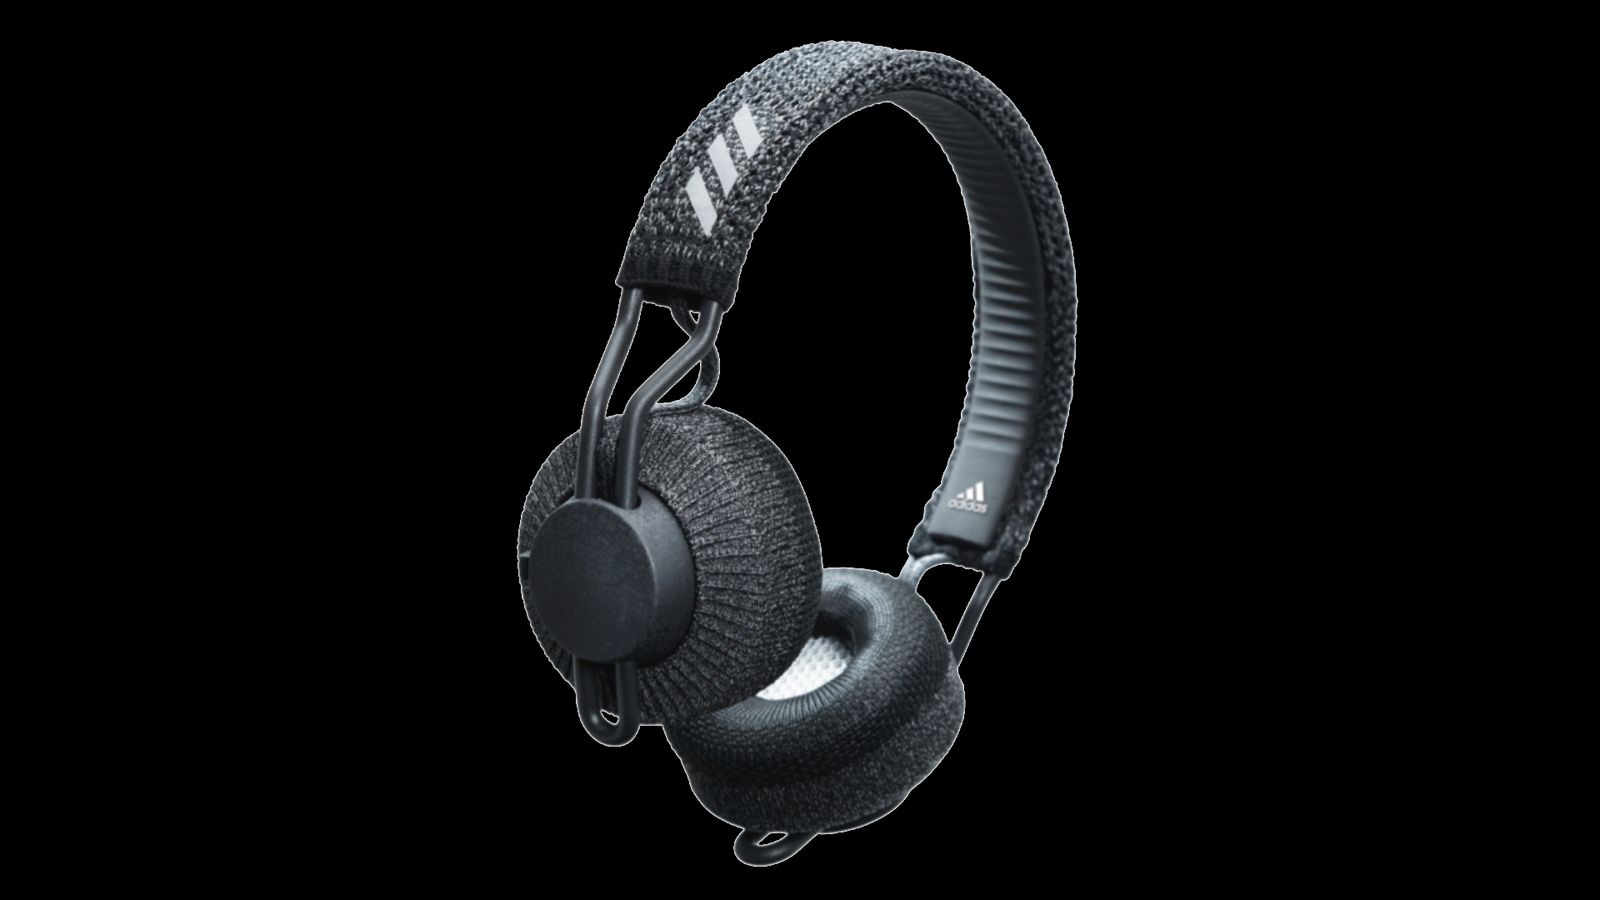 adidas Sport RPT-01 product image of a pair of black knitted over-ear headphones.